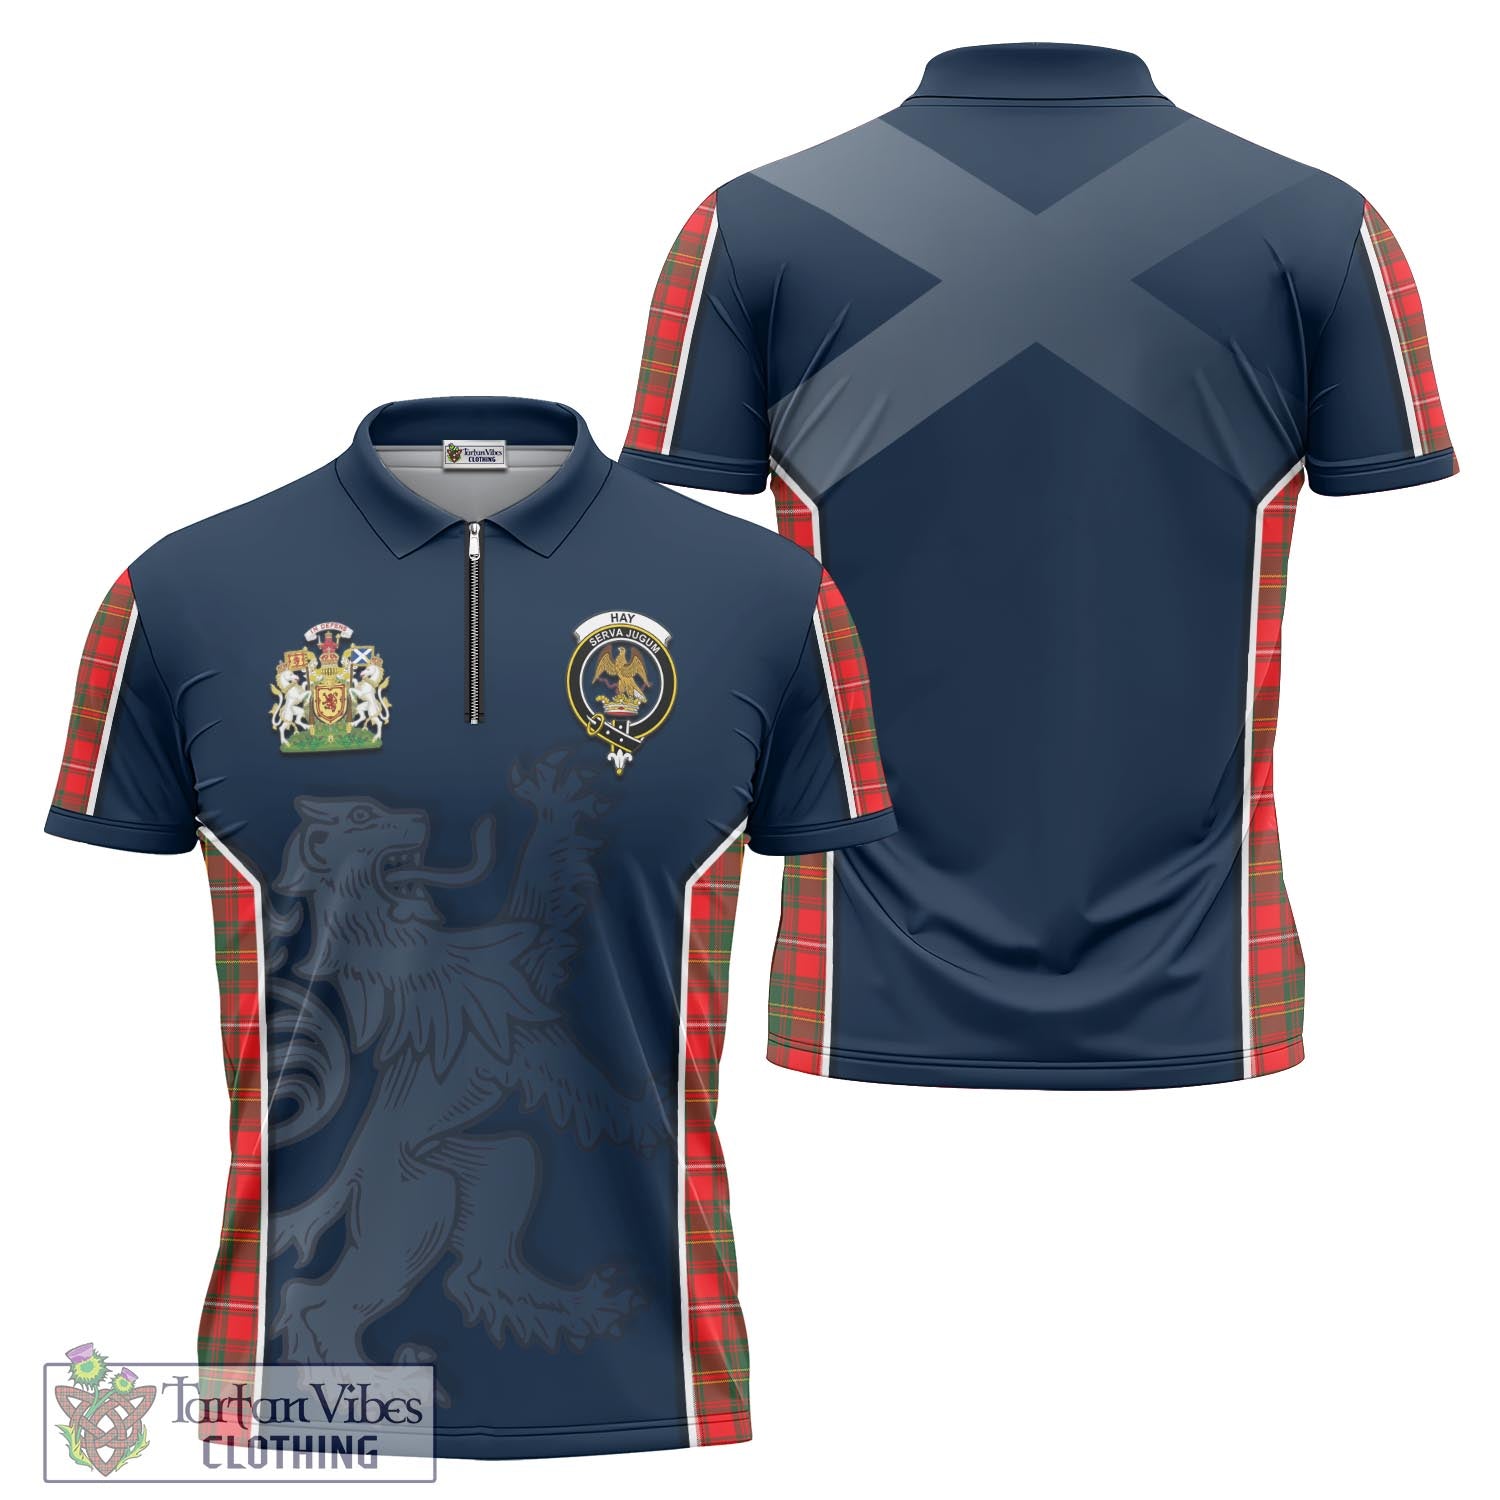 Tartan Vibes Clothing Hay Modern Tartan Zipper Polo Shirt with Family Crest and Lion Rampant Vibes Sport Style